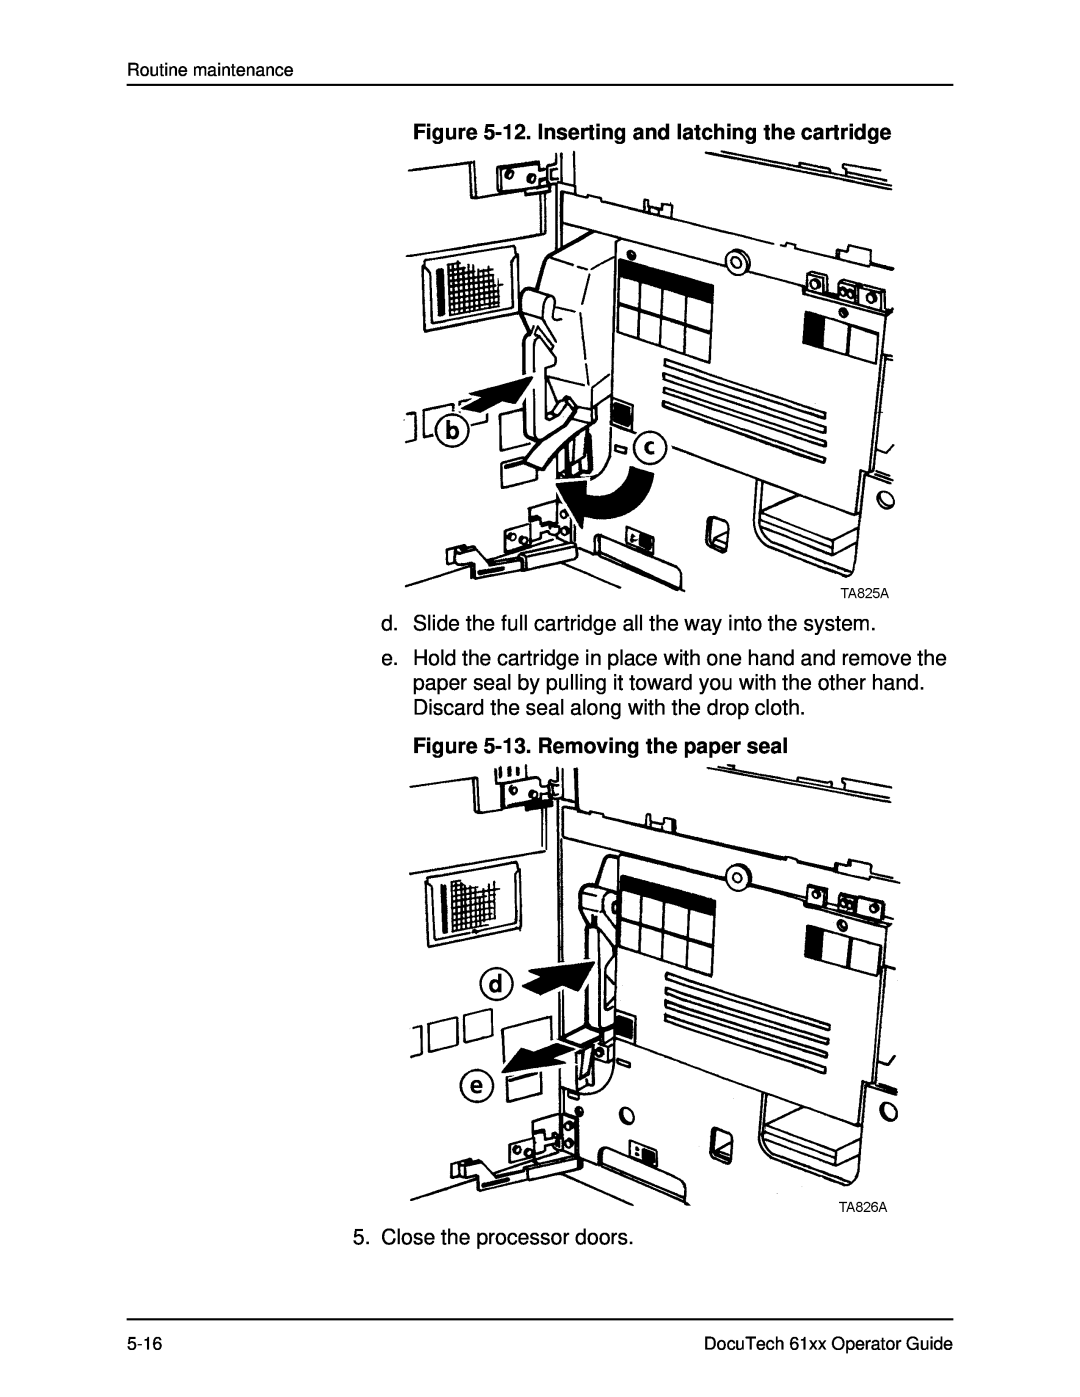 Xerox 61xx manual 12. Inserting and latching the cartridge, 13. Removing the paper seal, Close the processor doors 